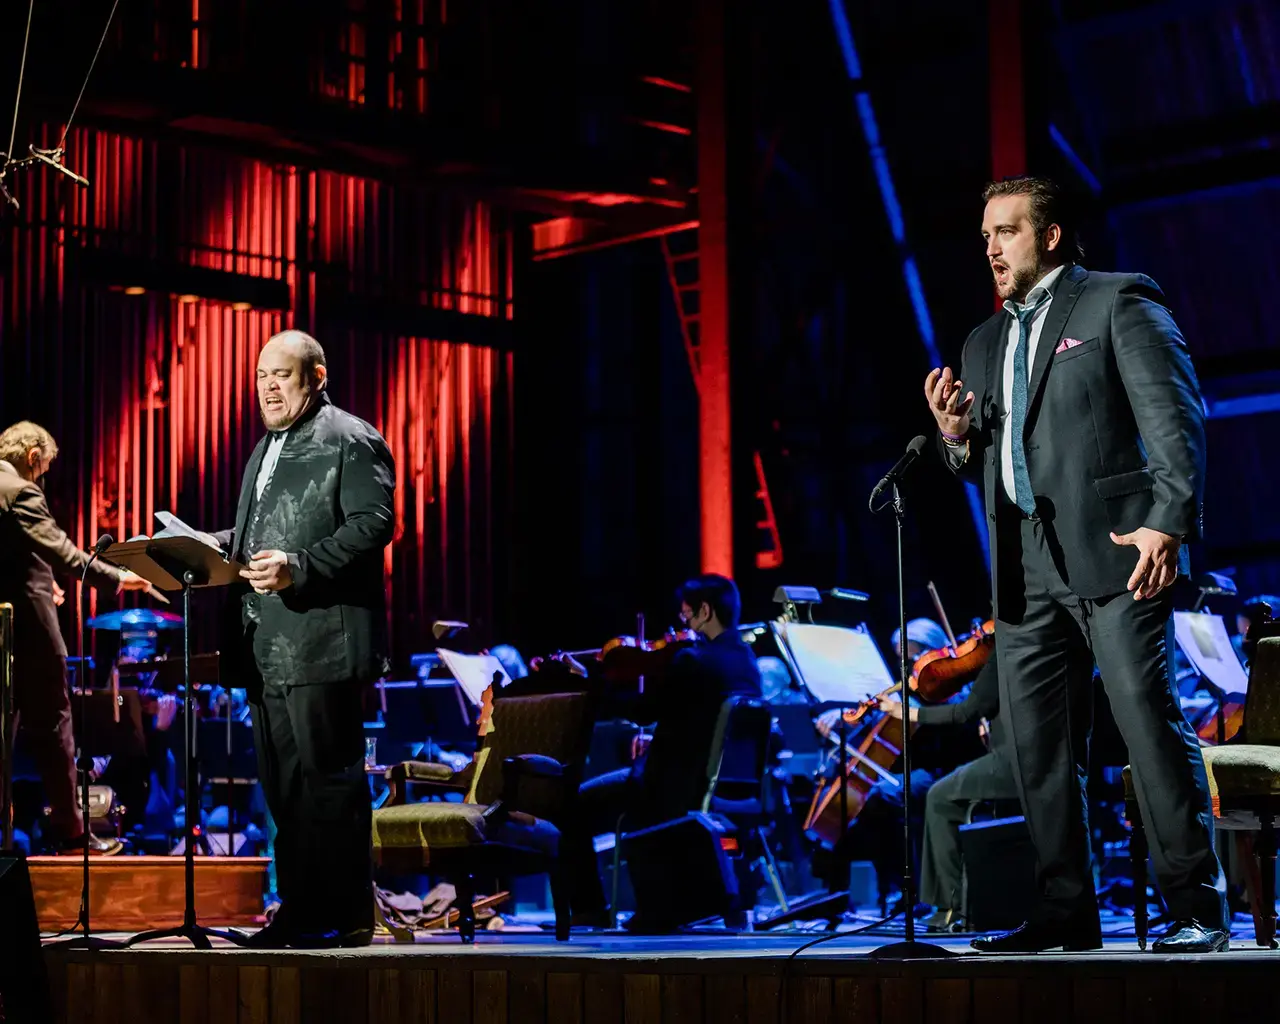 Opera Philadelphia onstage at the Mann Center for the Performing Arts, 2021. Photo courtesy of the Mann Center for the Performing Arts.